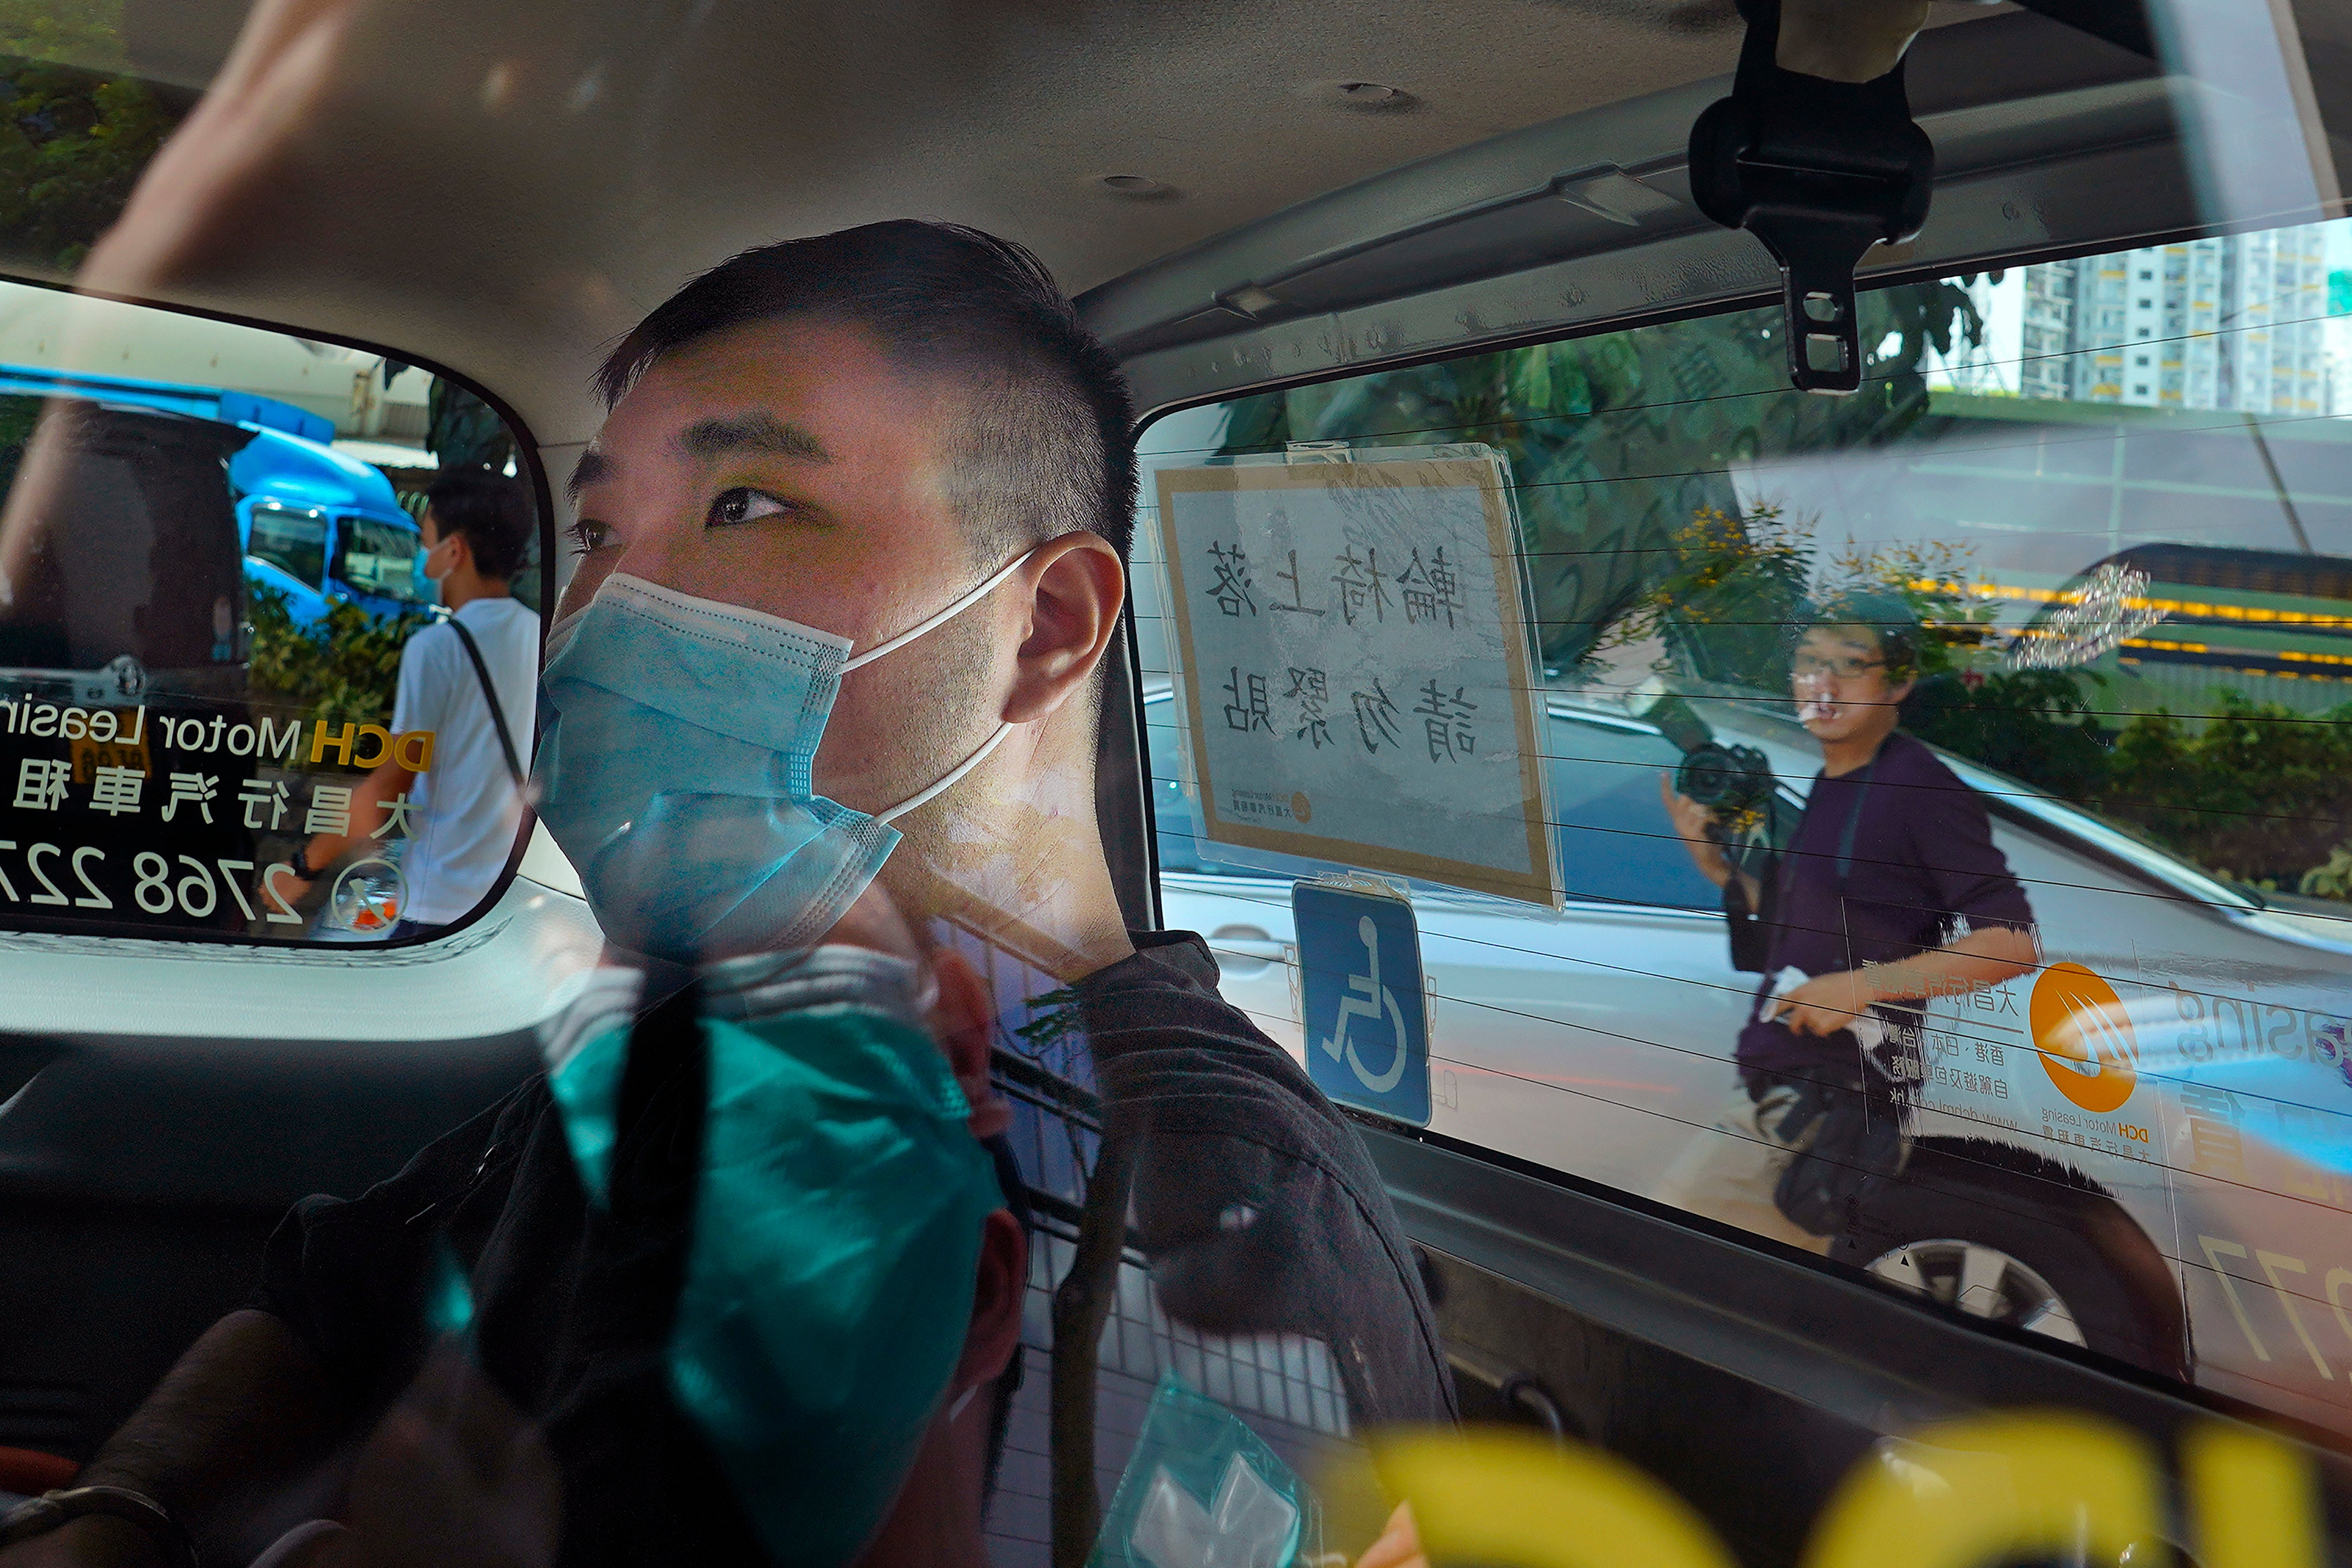 File: Tong Ying-kit arrives at a court in a police van in Hong Kong on 6 July, 2020